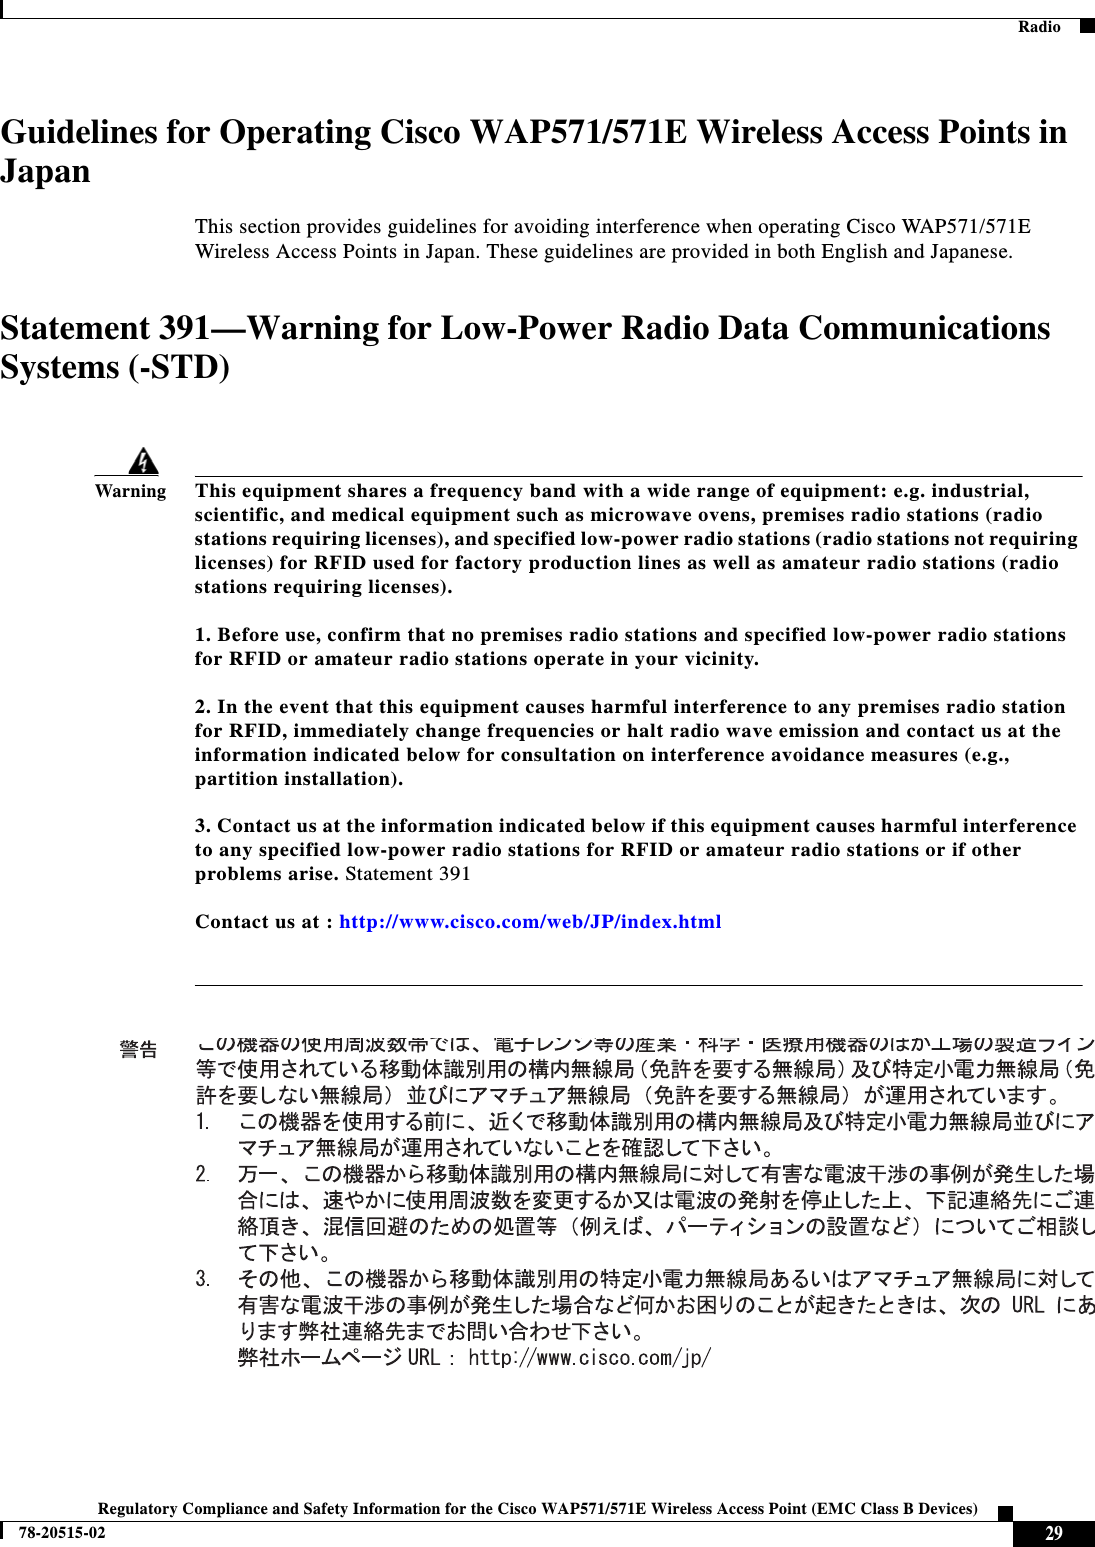  28Regulatory Compliance and Safety Information for the Cisco WAP571/571E Wireless Access Point (EMC Class B Devices)78-20515-02  Japanese Electric Appliance and Radio LawsJapanese Electric Appliance and Radio LawsStatement 571/571E—Power Cable and AC AdapterRadioThis section describes radio compliance conditions for the Cisco WAP571/571E Wireless Access Points EMC Class B Devices.Caution The Part 15 radio device operates on a non-interference basis with other devices operating at this frequency when using the integrated antennas. Any changes or modification to the product not expressly approved by Cisco could void the user’s authority to operate this device.Canadian Radio Warning StatementThis device complies with RSS-210 of the Industry Canada Rules. Operation is subject to the following two conditions: (1) This device may not cause harmful interference, and (2) this device must accept any interference received, including interference that may cause undesired operation. Ce dispositif est conforme aÌ la norme CNR-210 d&apos;Industrie Canada applicable aux appareils radio exempts de licence. Son fonctionnement est sujet aux deux conditions suivantes: (1) le dispositif ne doit pas produire de brouillage preìjudiciable, et (2) ce dispositif doit accepter tout brouillage rec?u, y compris un brouillage susceptible de provoquer un fonctionnement indeìsirable. WarningWhen installing the product, please use the provided or designated connection cables/power cables/AC adaptors/batteries. Using any other cables/adaptors could cause a malfunction or a fire. Electrical Appliance and Material Safety Law prohibits the use of UL-certified cables (that have the “UL” or “CSA” shown on the cord), not regulated with the subject law by showing &quot;PSE&quot; on the cord, for any other electrical devices than products designated by CISCO.RSS-247CNR-247